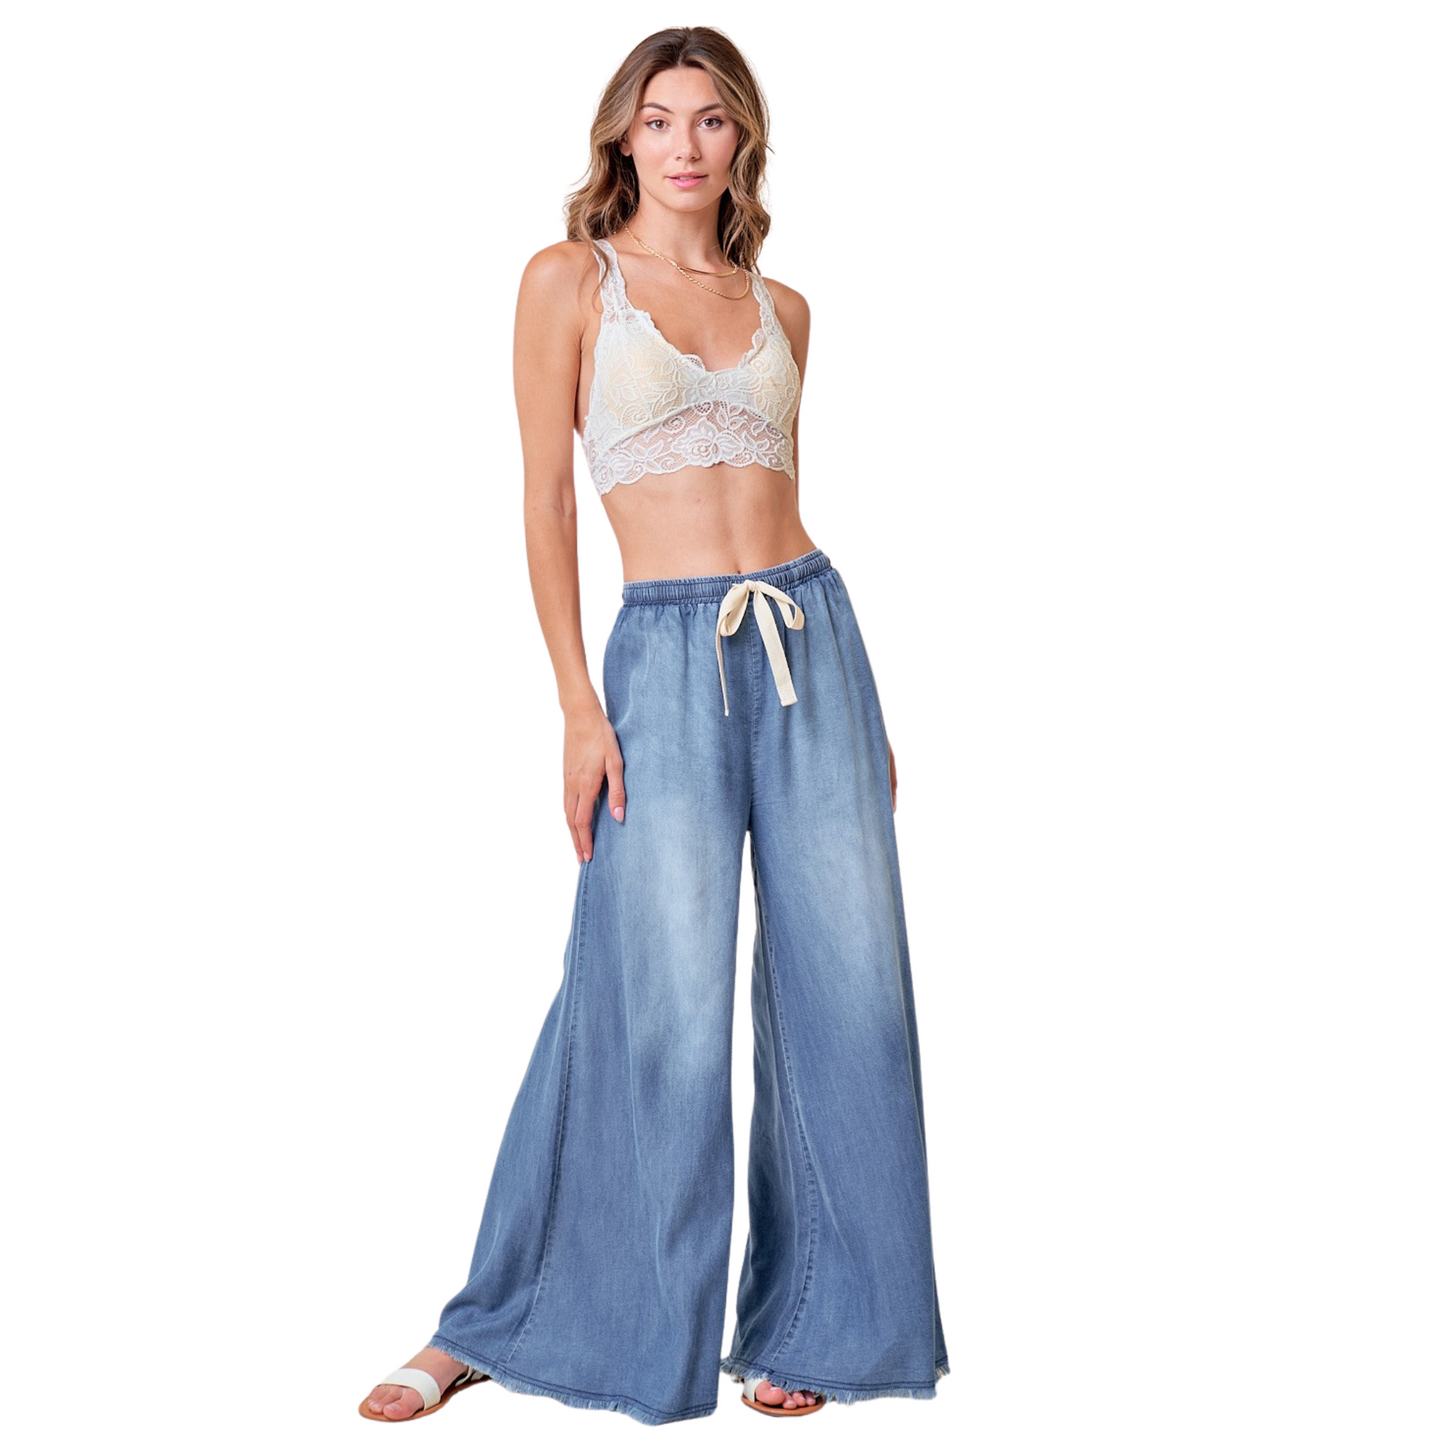 These wide leg denim pants are perfect for any casual outing. The light wash adds a touch of style while the drawstring allows for a customizable fit. Made from high-quality denim, these pants provide both comfort and fashion for any occasion.